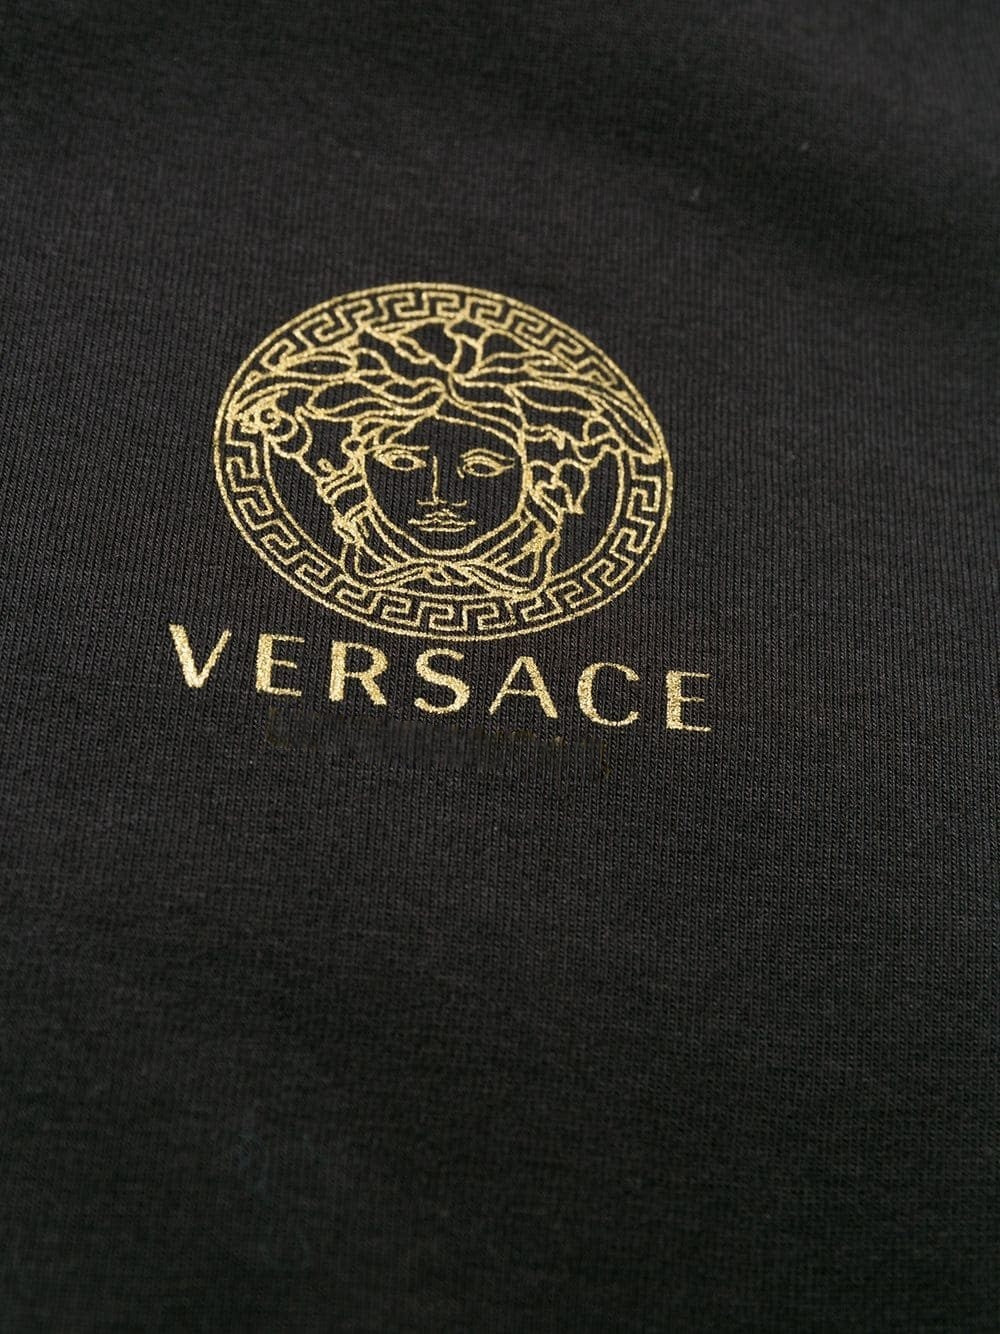 AUTHENTIC VERSACE ACRYLIC SIGN W/ MEDUSA HEAD ROUND STORE DISPLAY 15